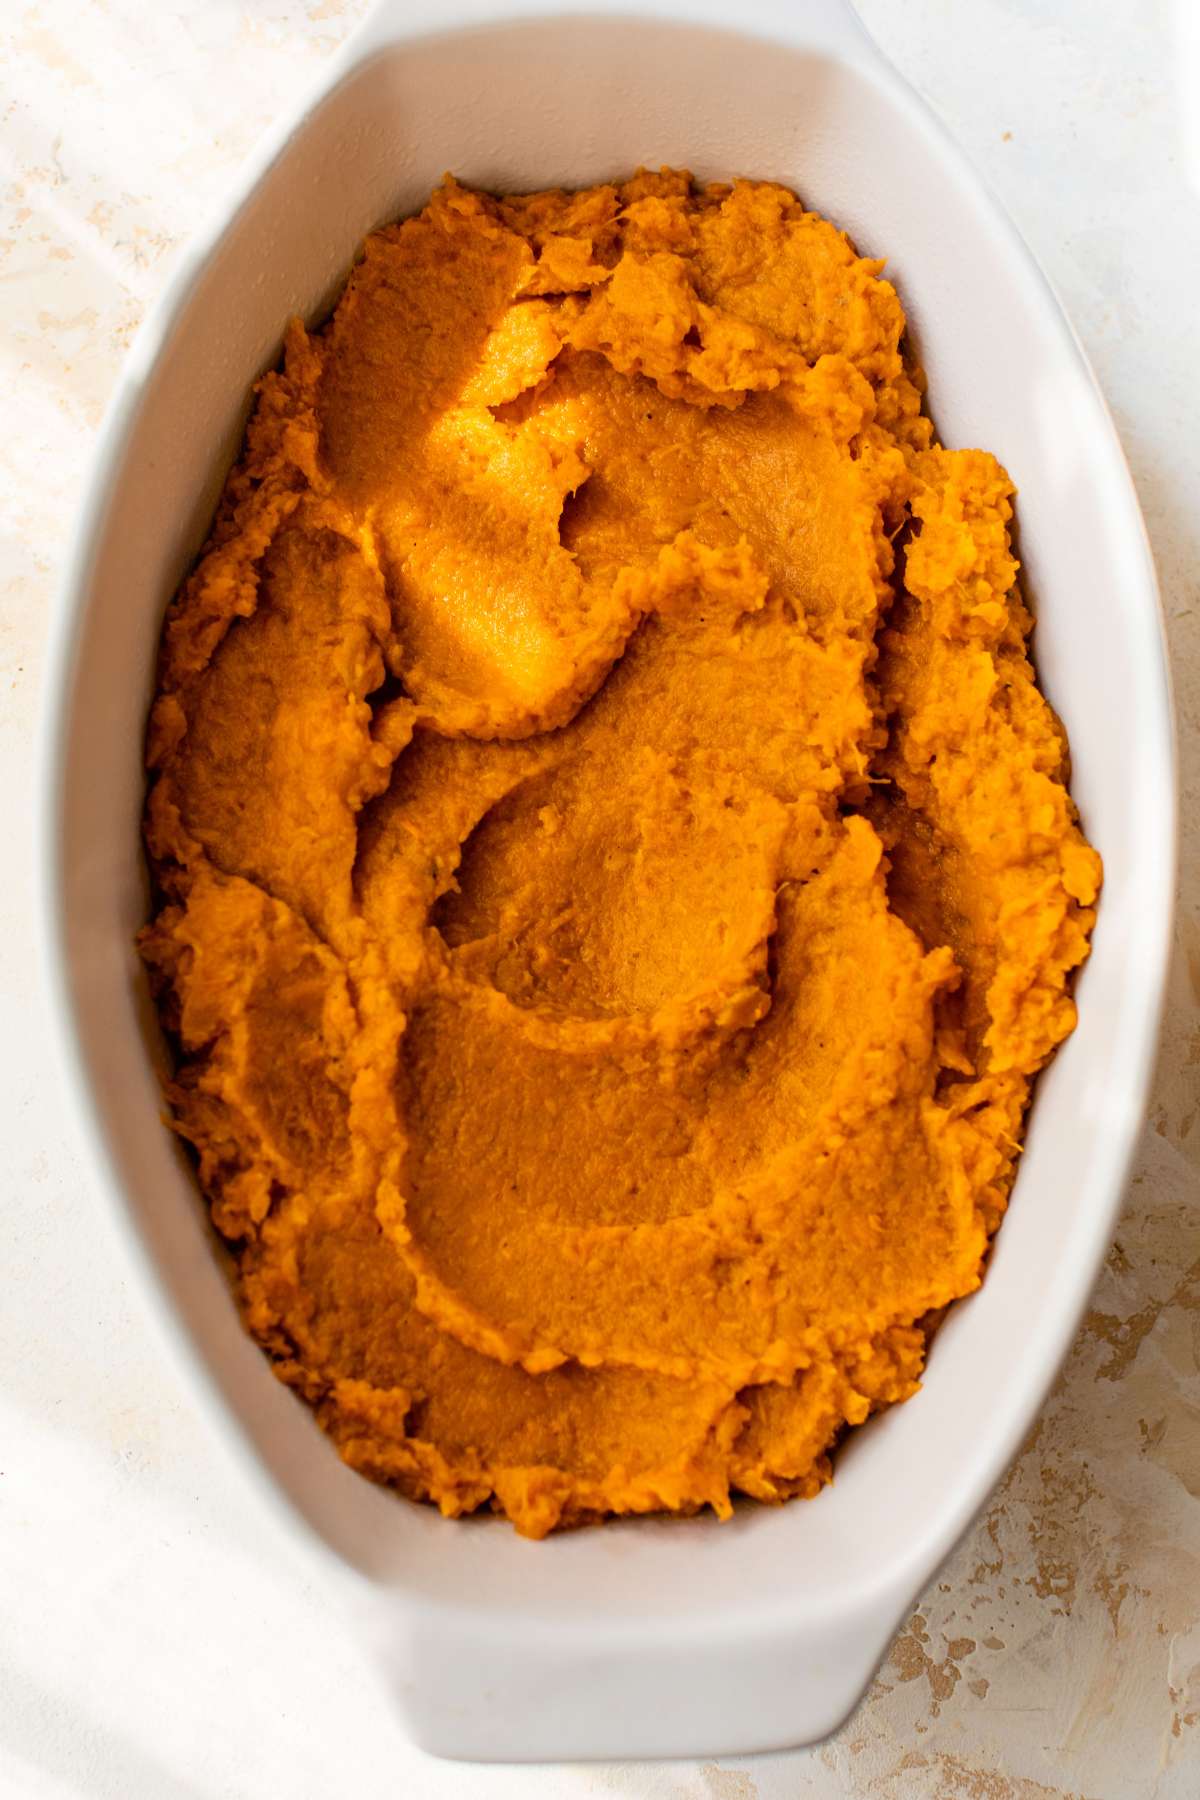 Sweet potato mixture smoothed in a casserole dish.